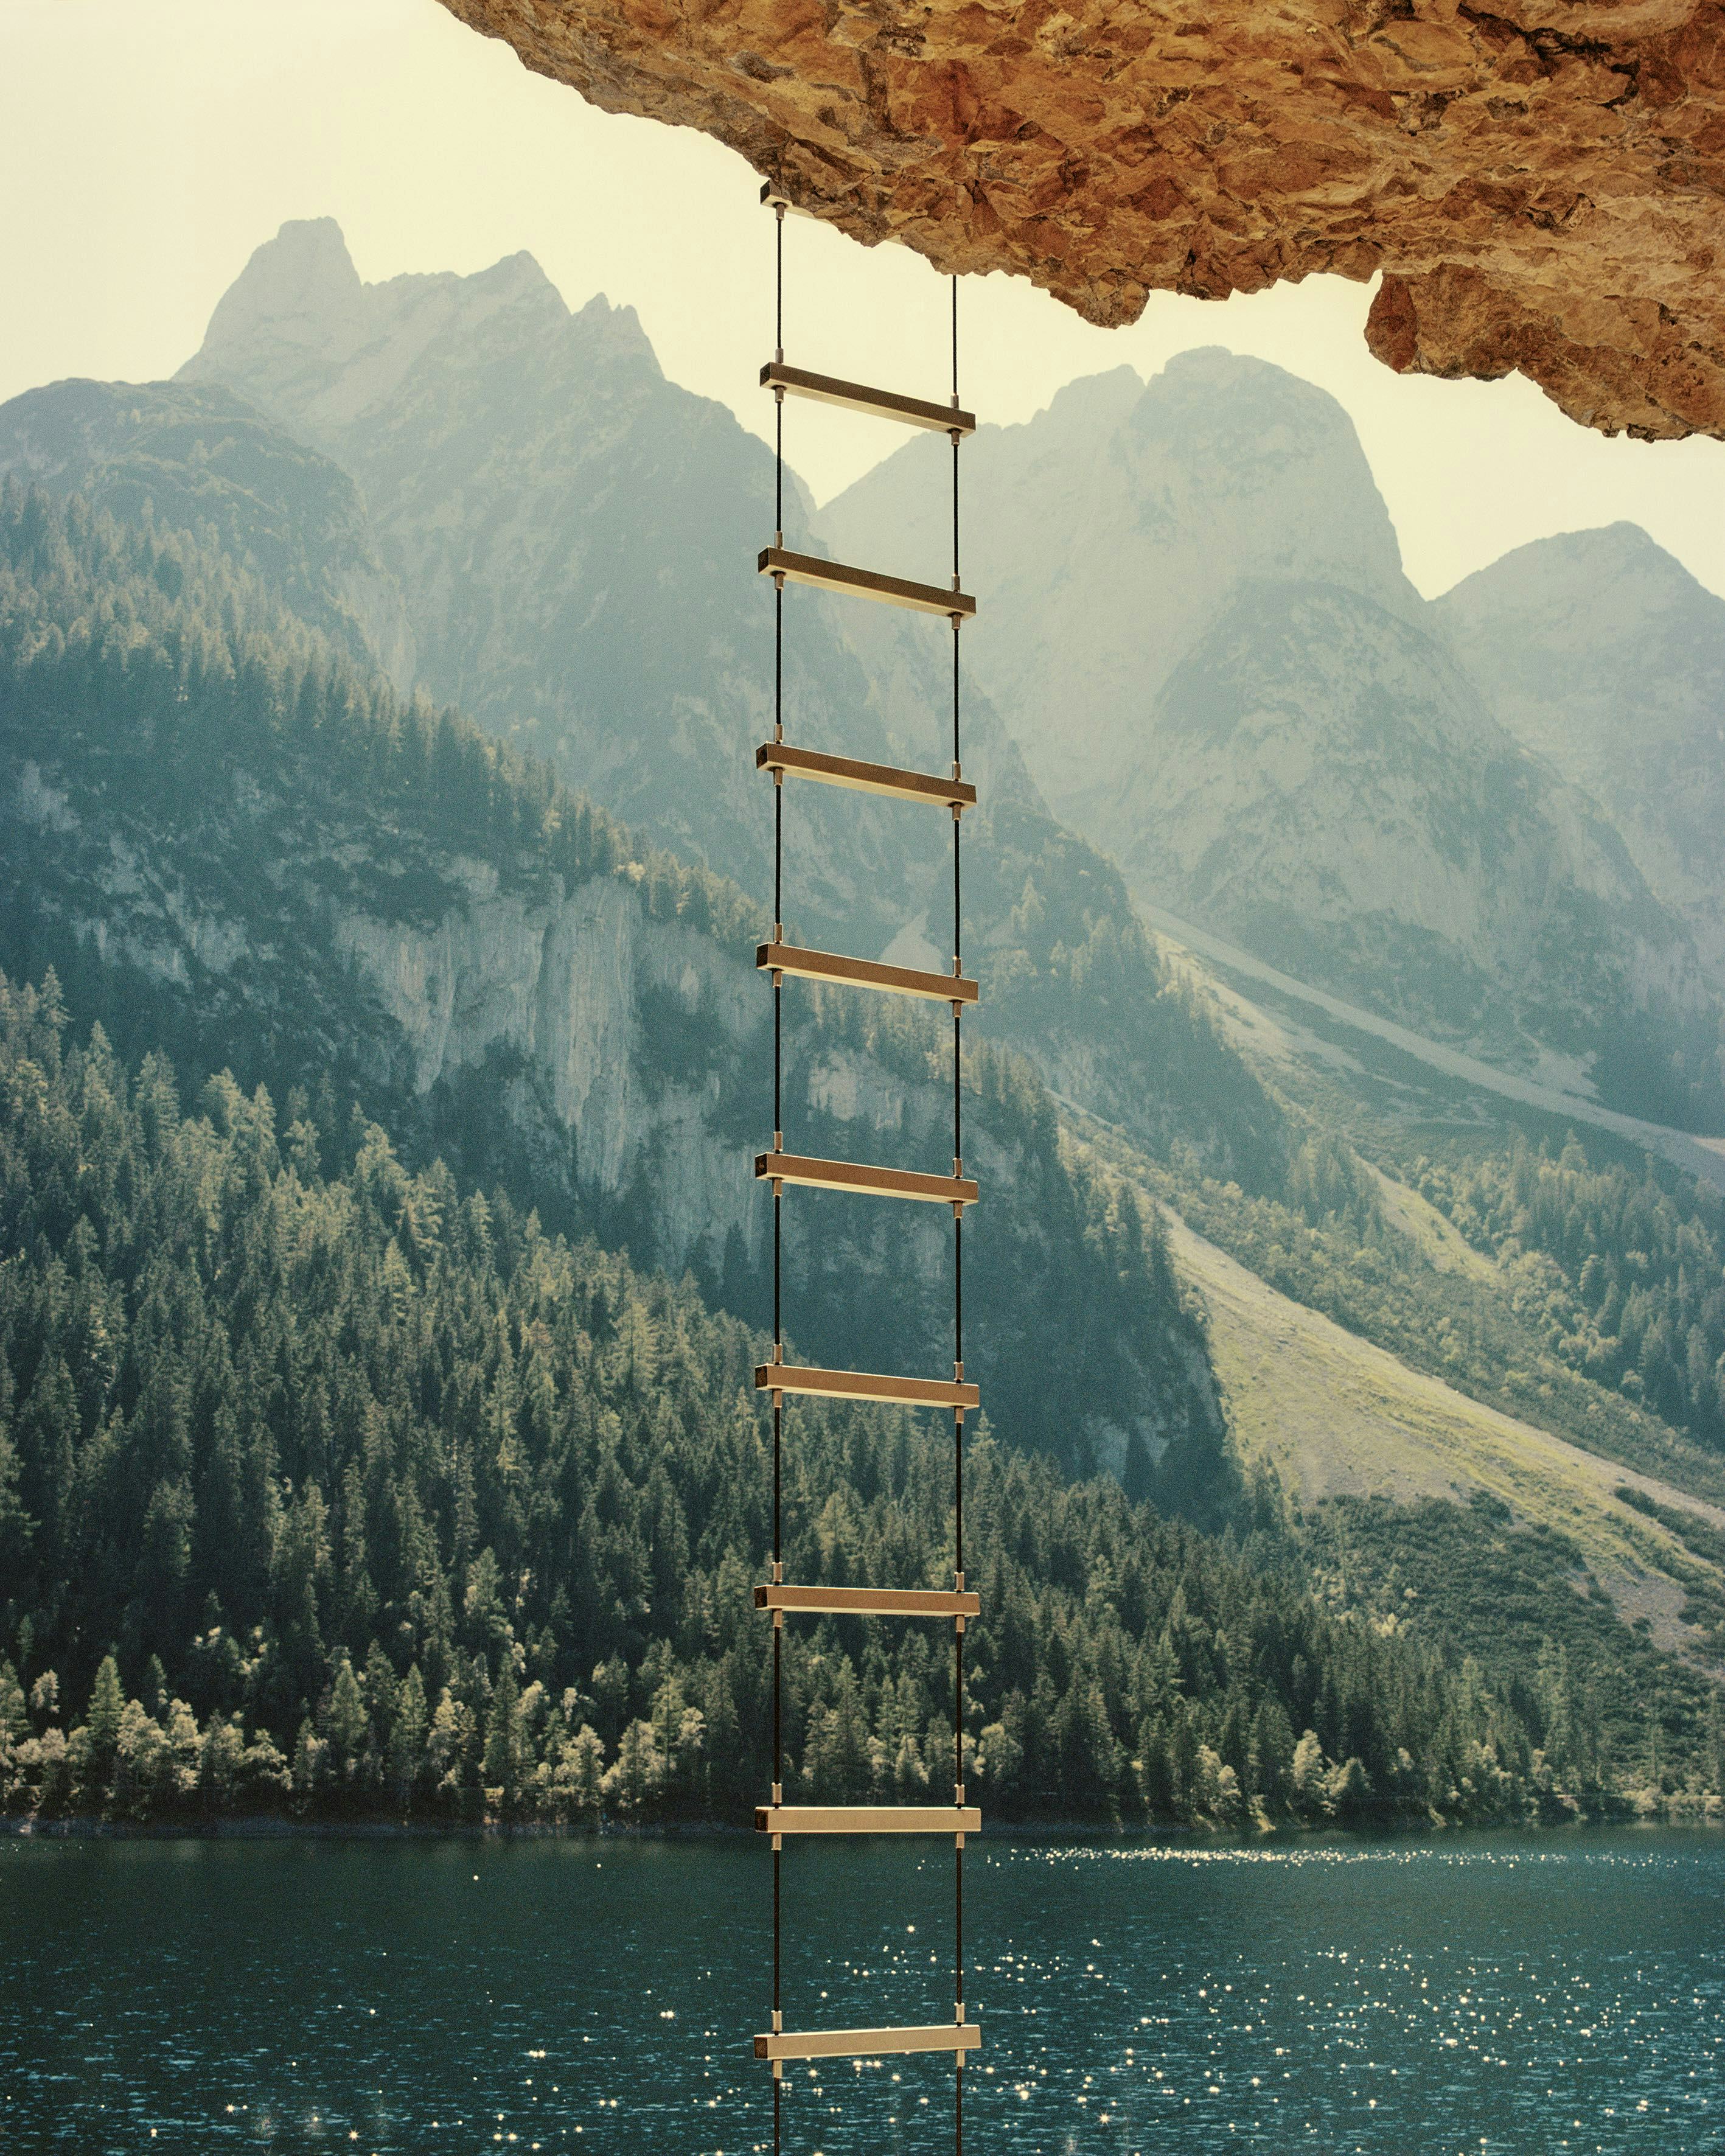 Picturesque image of mountain landscape with a mountain lake and in the forefront a ladder hanging from a rock